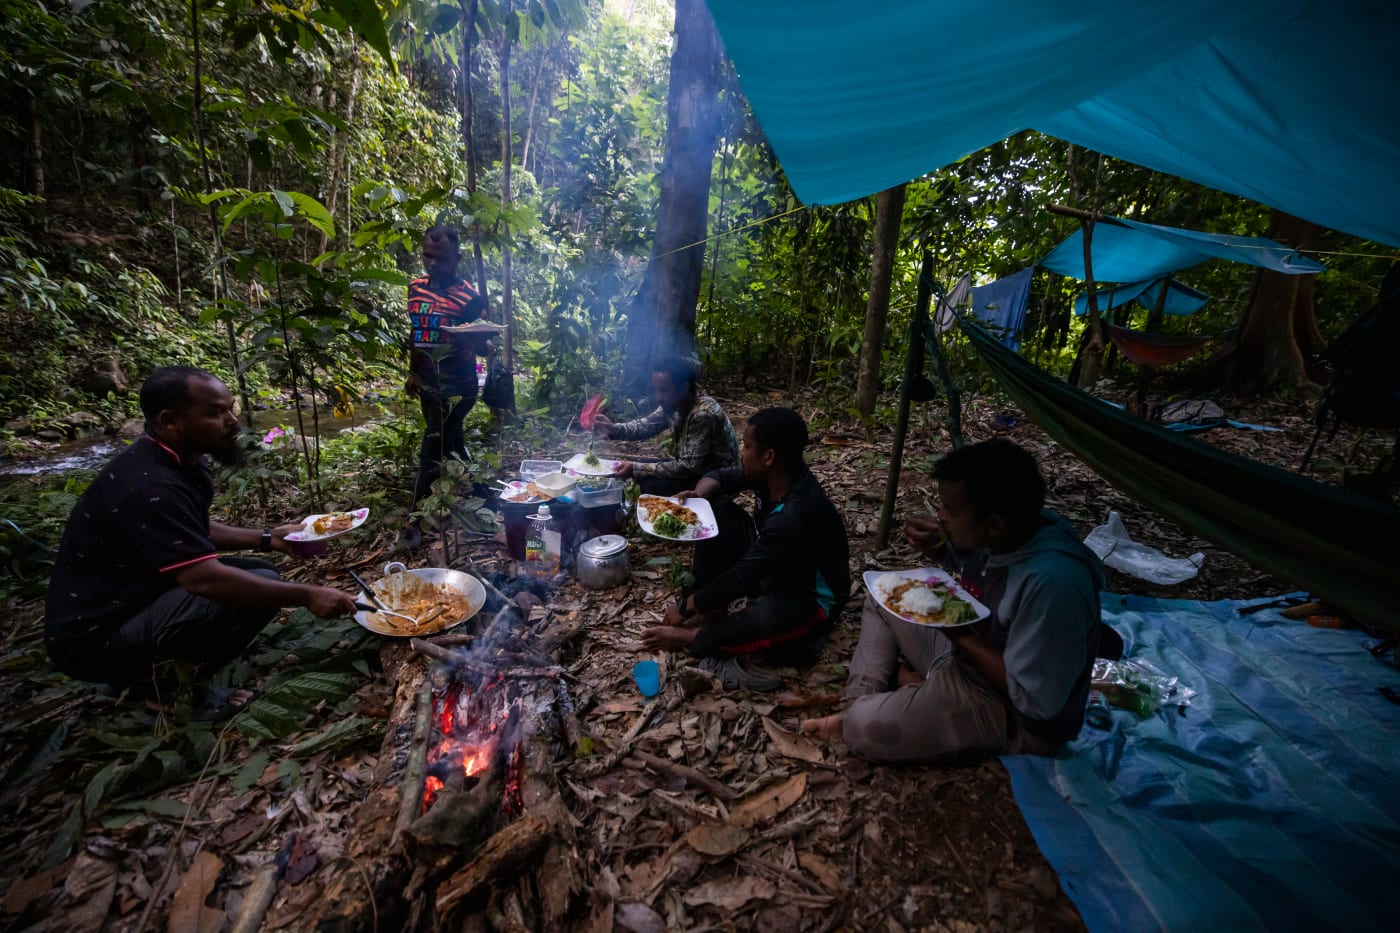 An anti-poaching patrol team out on patrol in Malaysia's Royal Belum State Park sits around the campfire and enjoys a well earned evening meal.